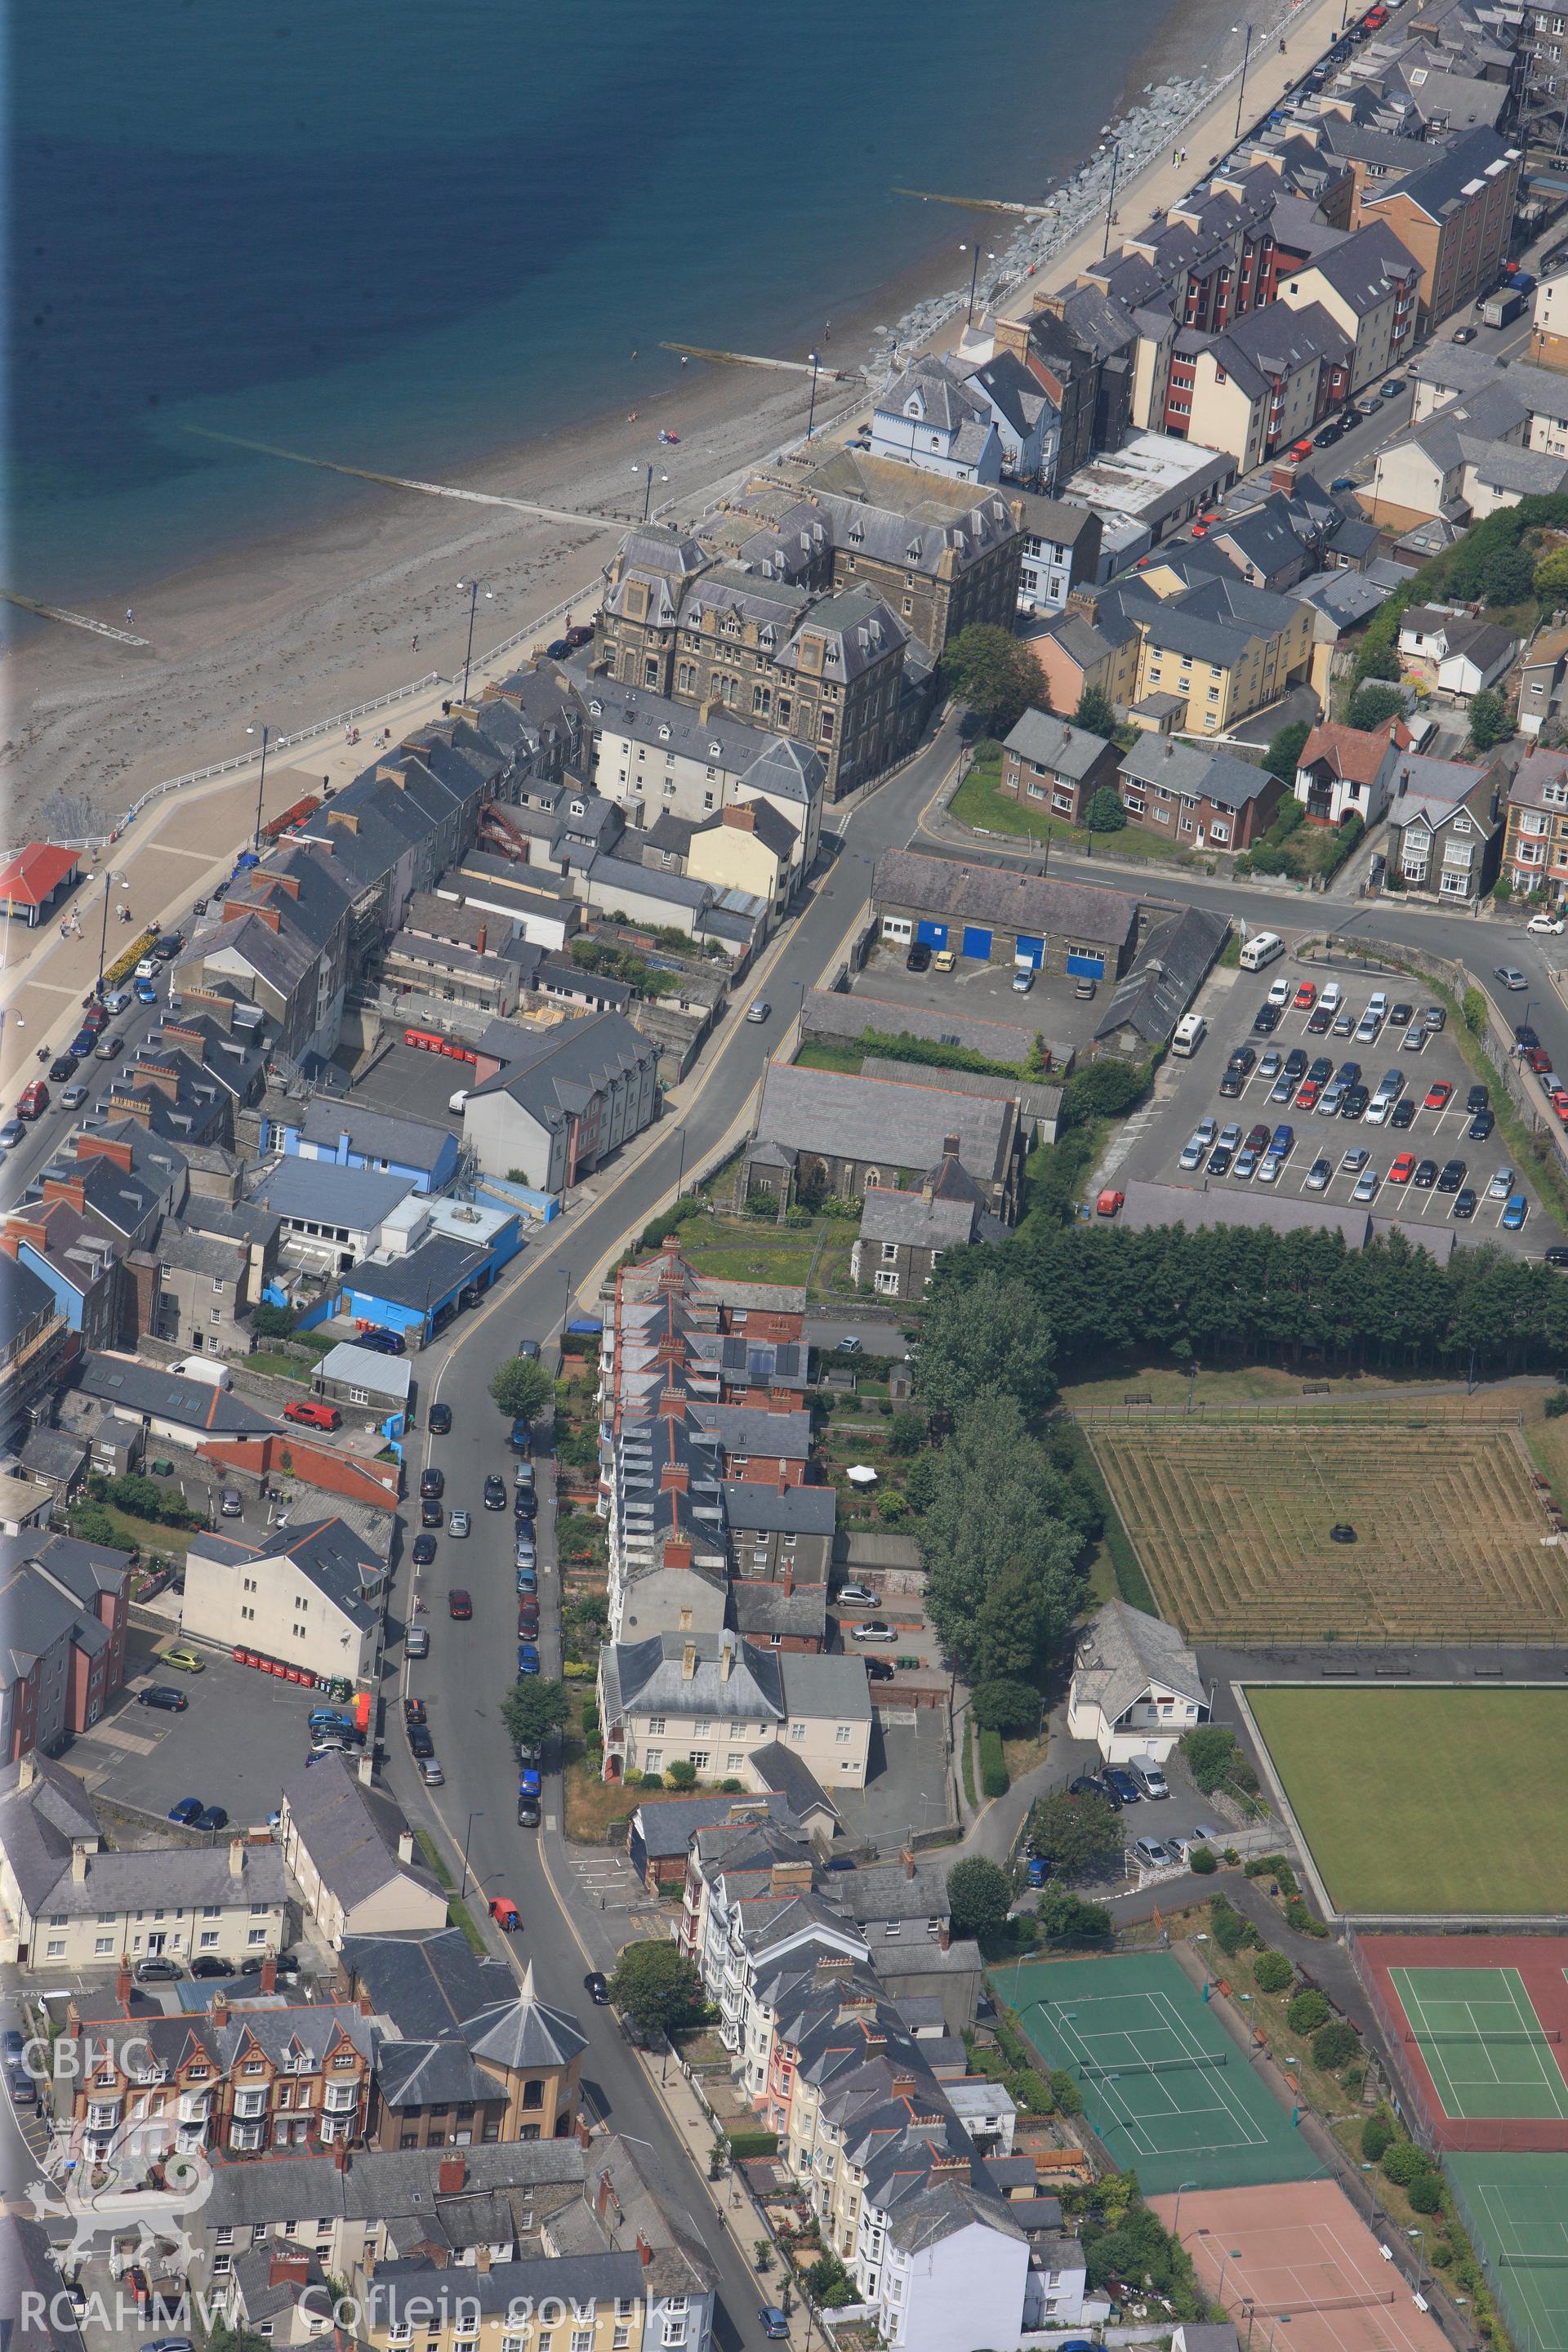 View of Aberystwyth including promenade, old County Hall, Catholic Church on Queen's Road, and Bathrock Shelter. Oblique aerial photograph taken during Royal Commission?s programme of archaeological aerial reconnaissance by Toby Driver on 12th July 2013.